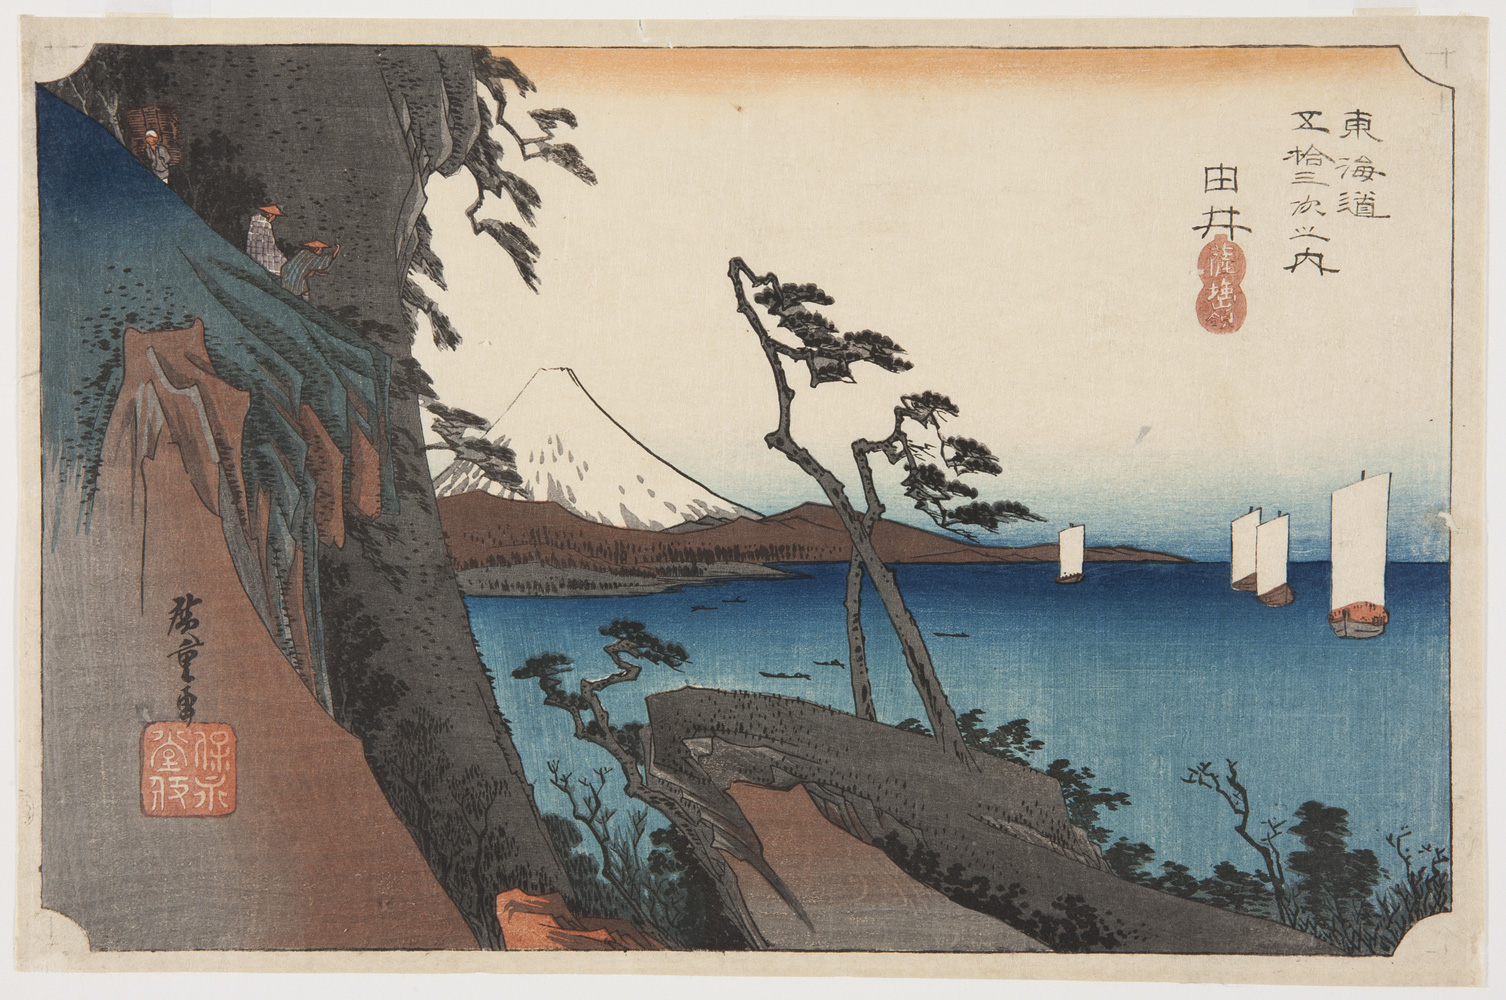 japanese print of a beautiful view of mount fuji in the background, with the bright blue sea and boats in front of it